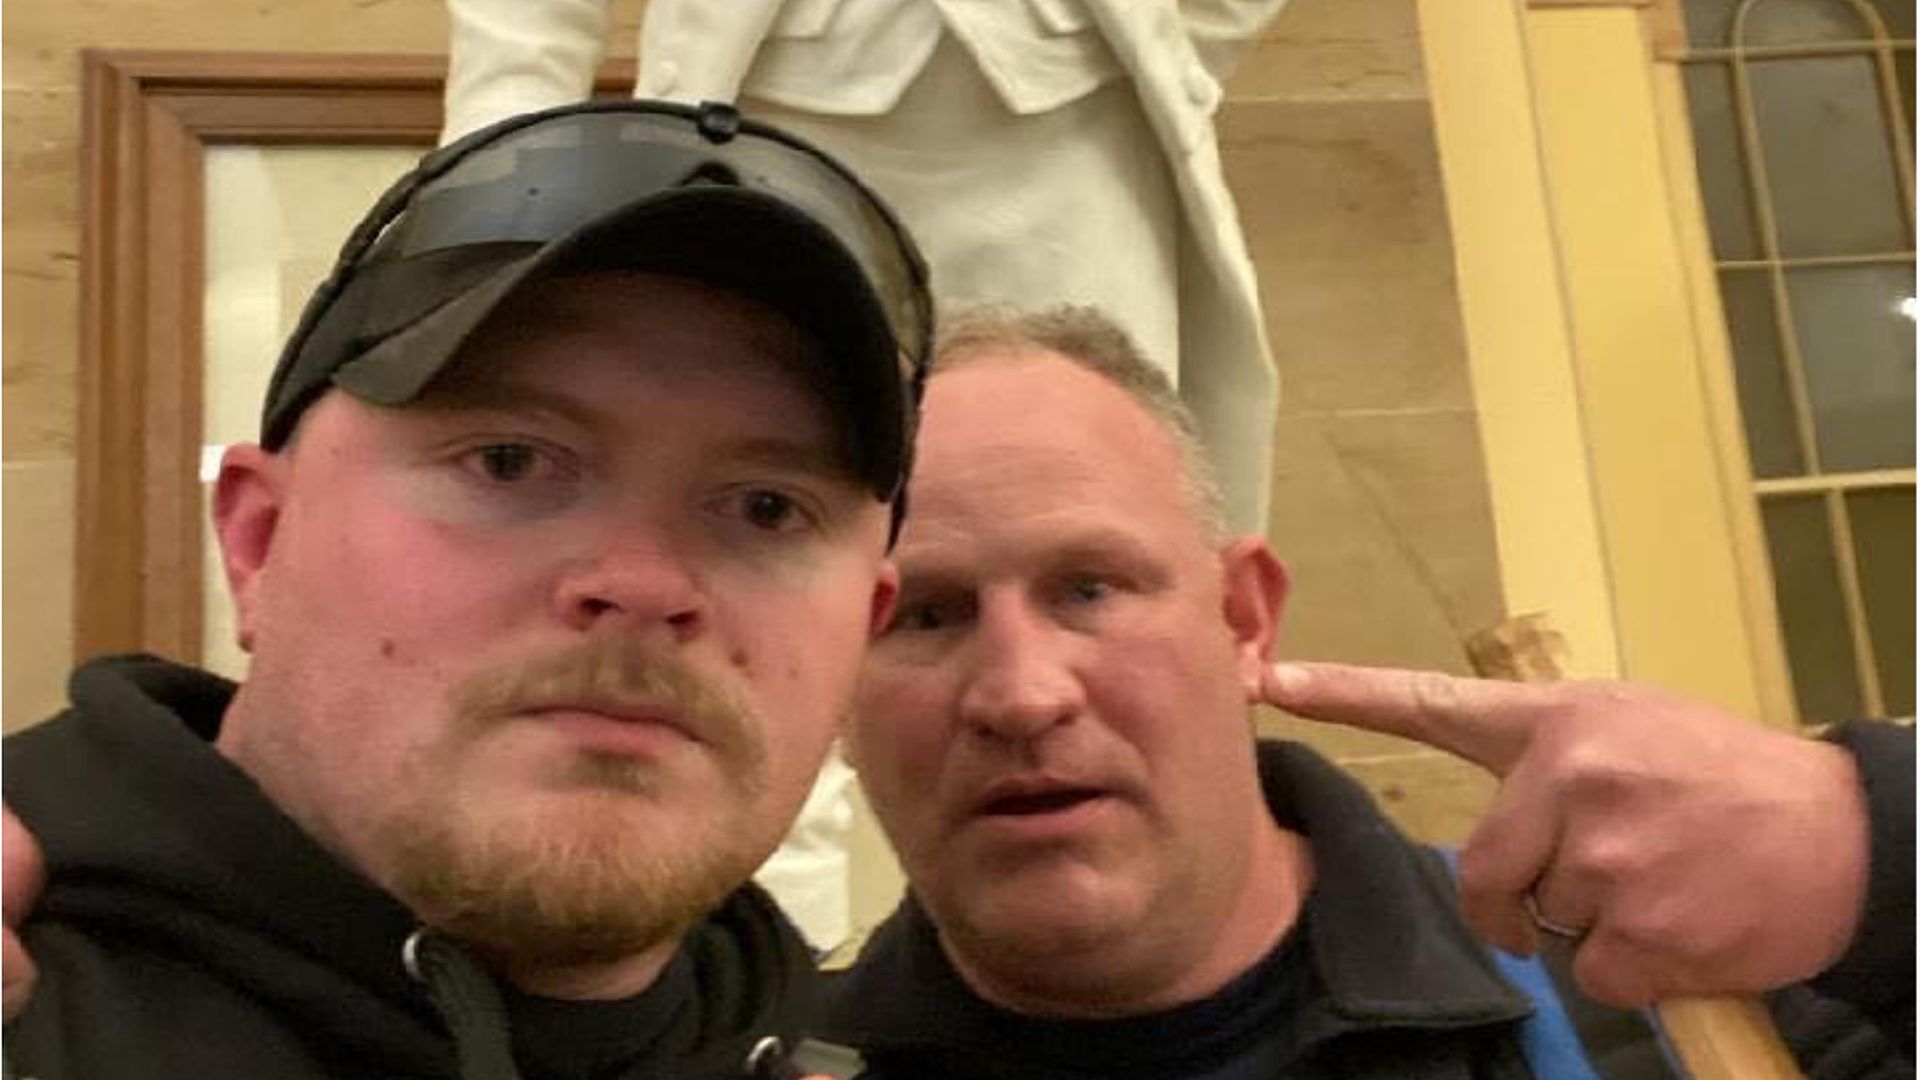 A photo included as an exhibit in the criminal complaint released by authorities shows the men posing in front of the statue with their fingers raised. 